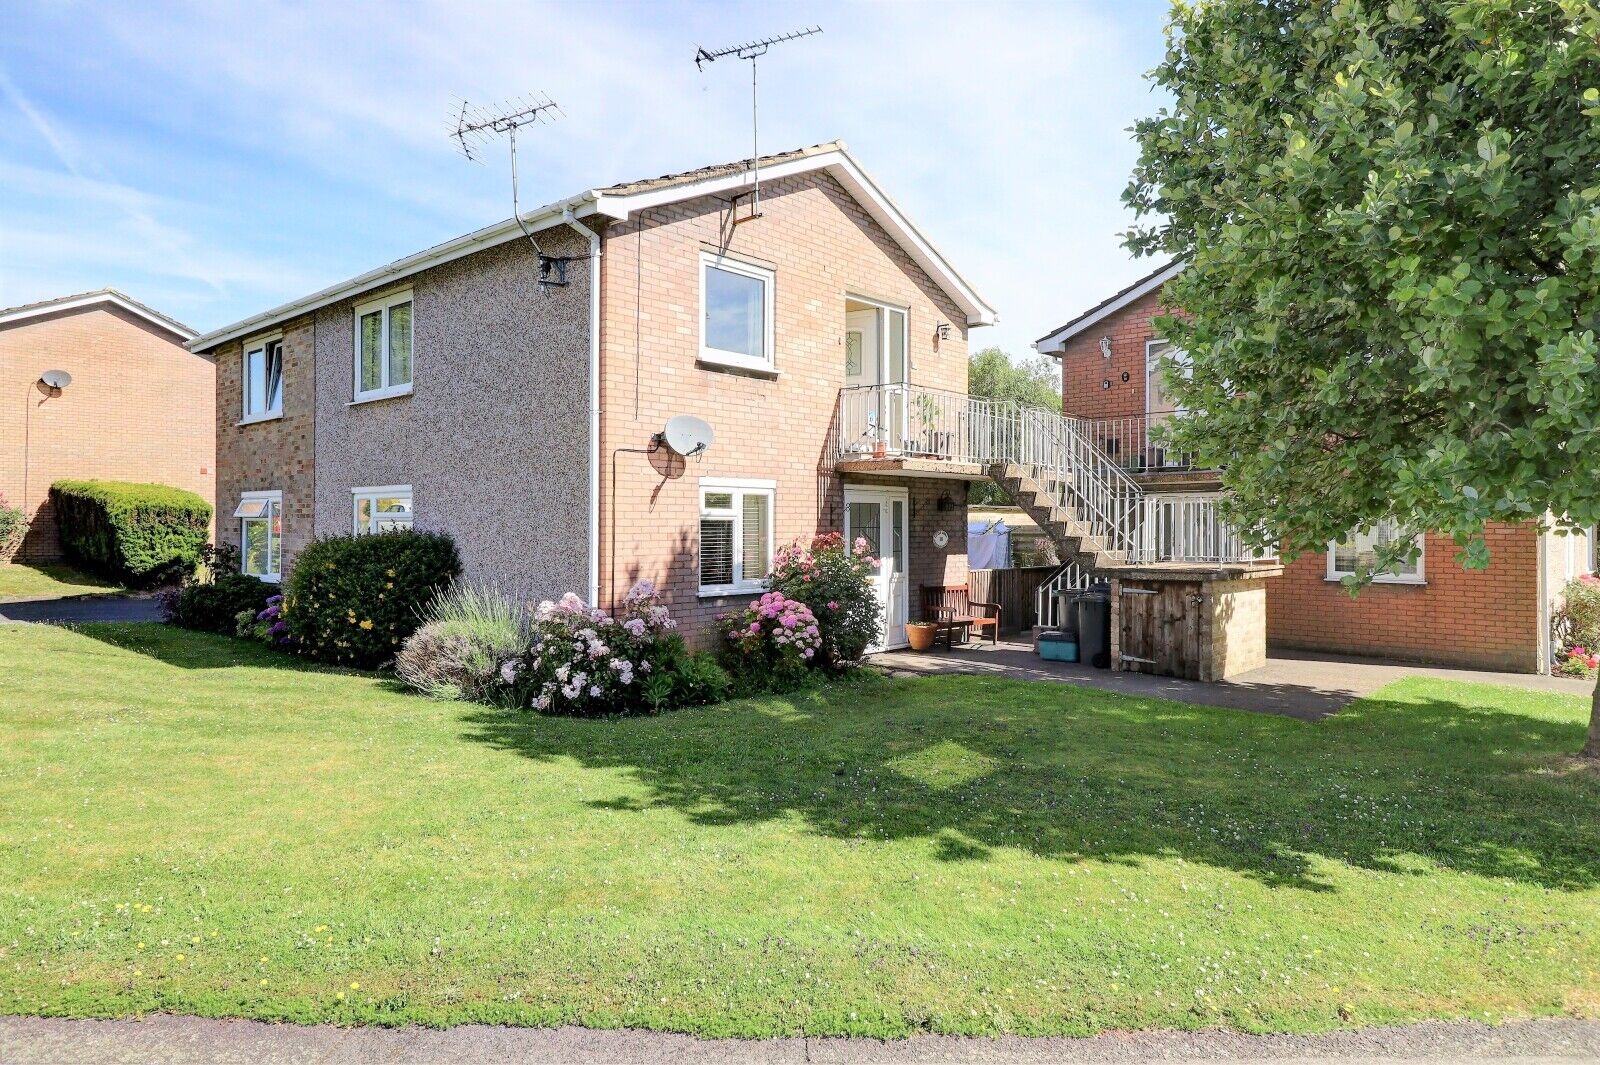 2 bedroom  flat for sale Hawthorn Crescent, High Wycombe, HP15, main image